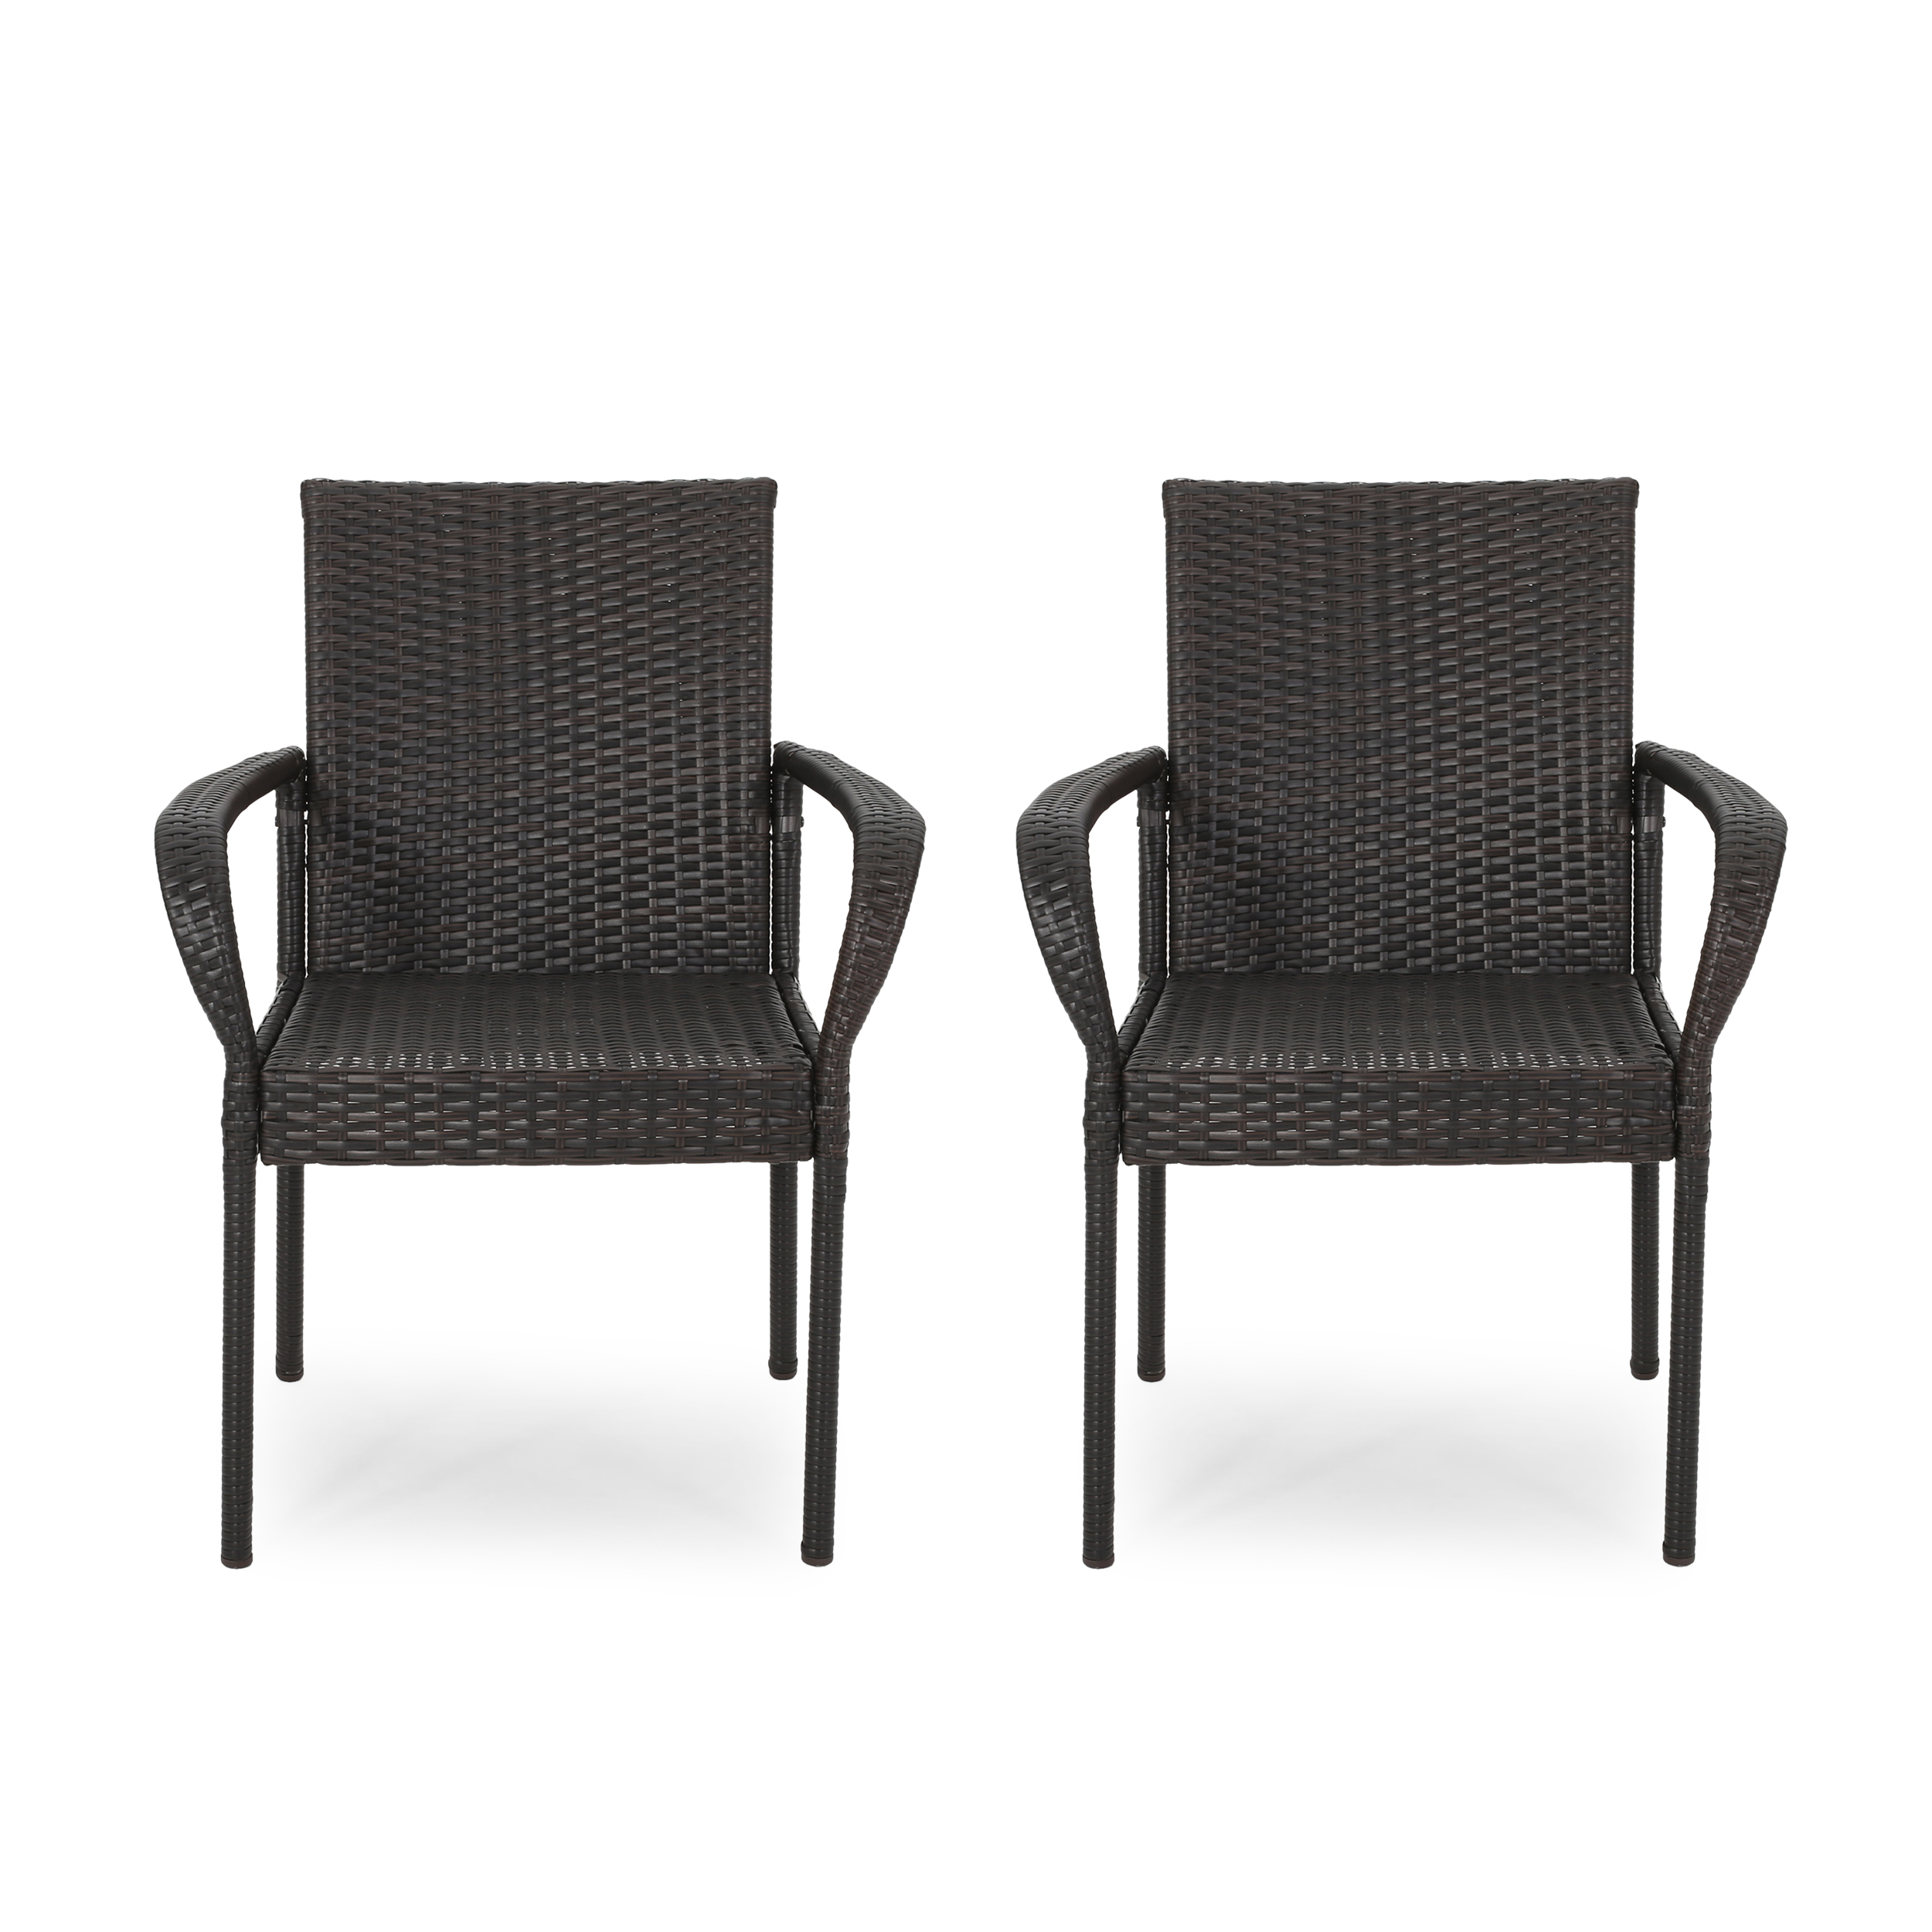 Noble House Trombone Outdoor Wicker Dining Chair in Multibrown (Set of 2) - image 1 of 7